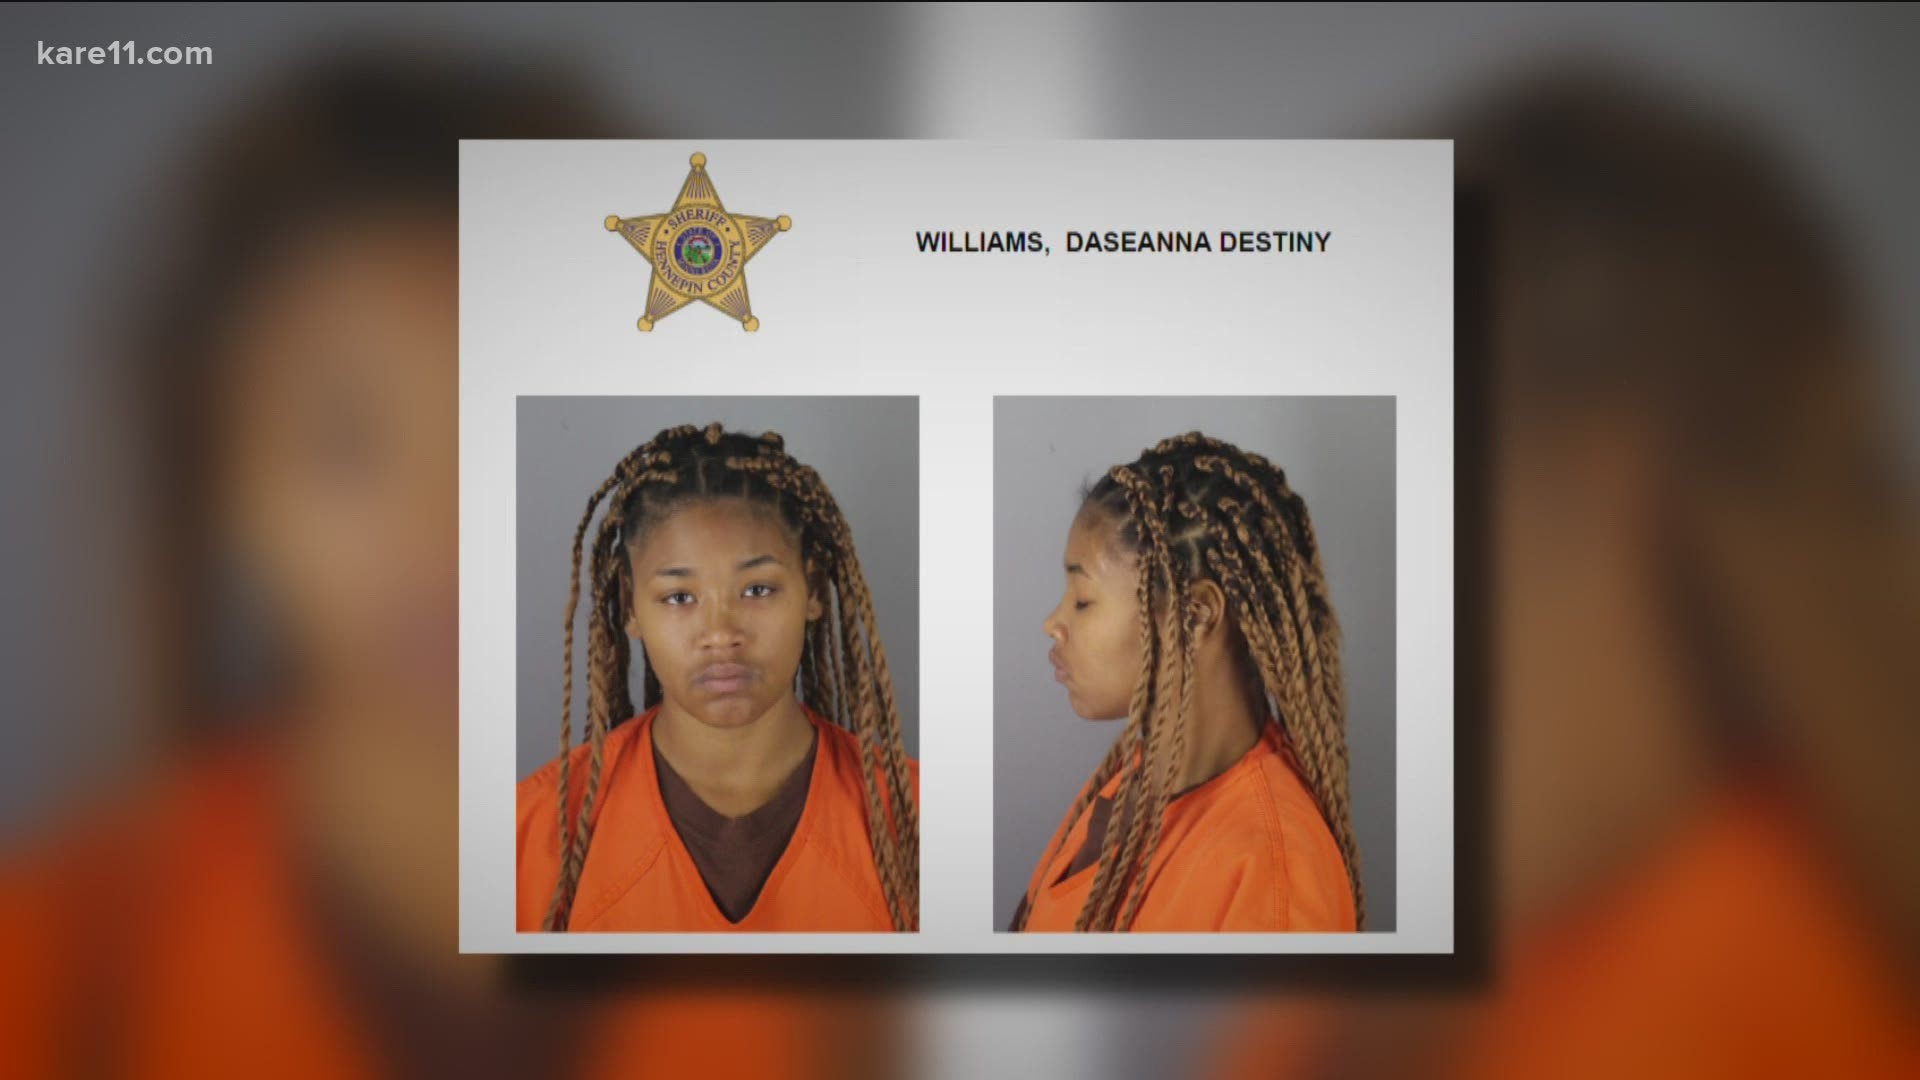 Police say 21-year-old Da'Seanna Williams admitted to shooting, beating and robbing the woman outside the victim's apartment